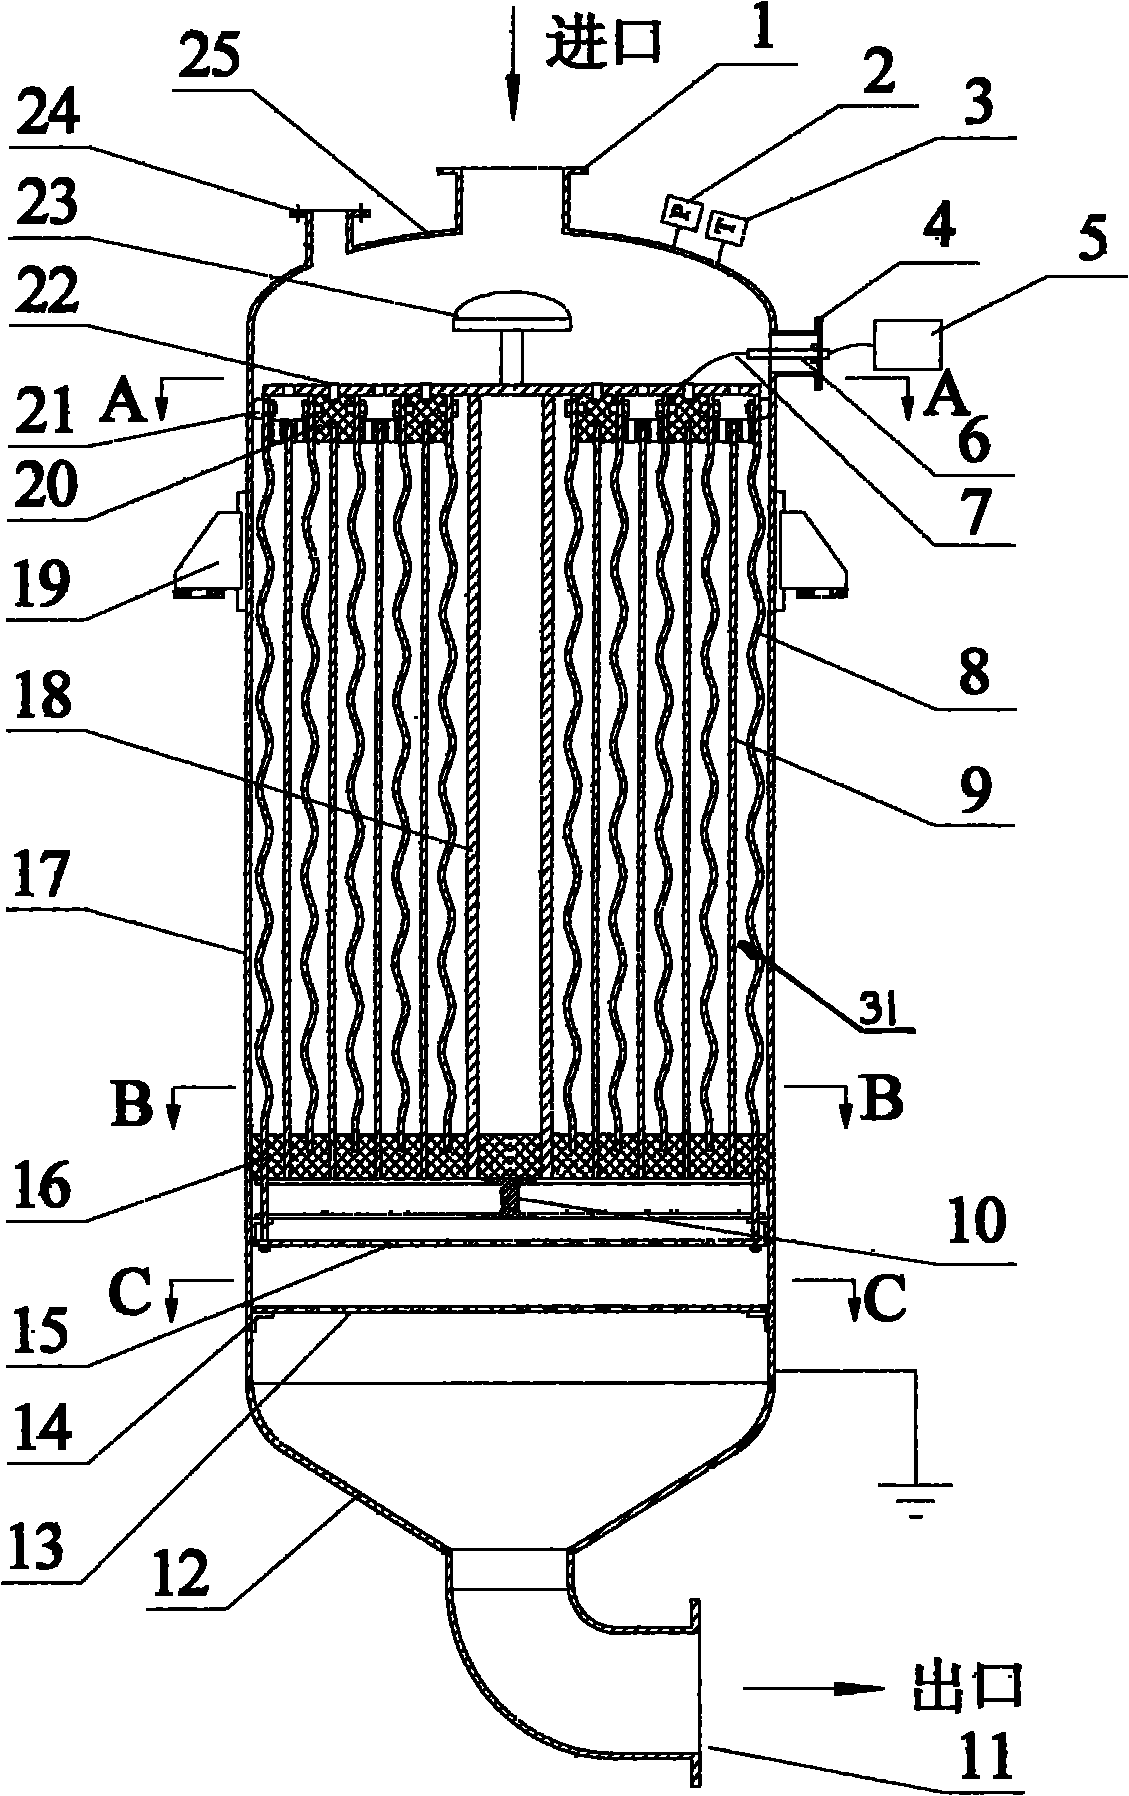 Novel and efficient electrostatic pre-coalescence method and device applied to dehydration and desalt of crude oil